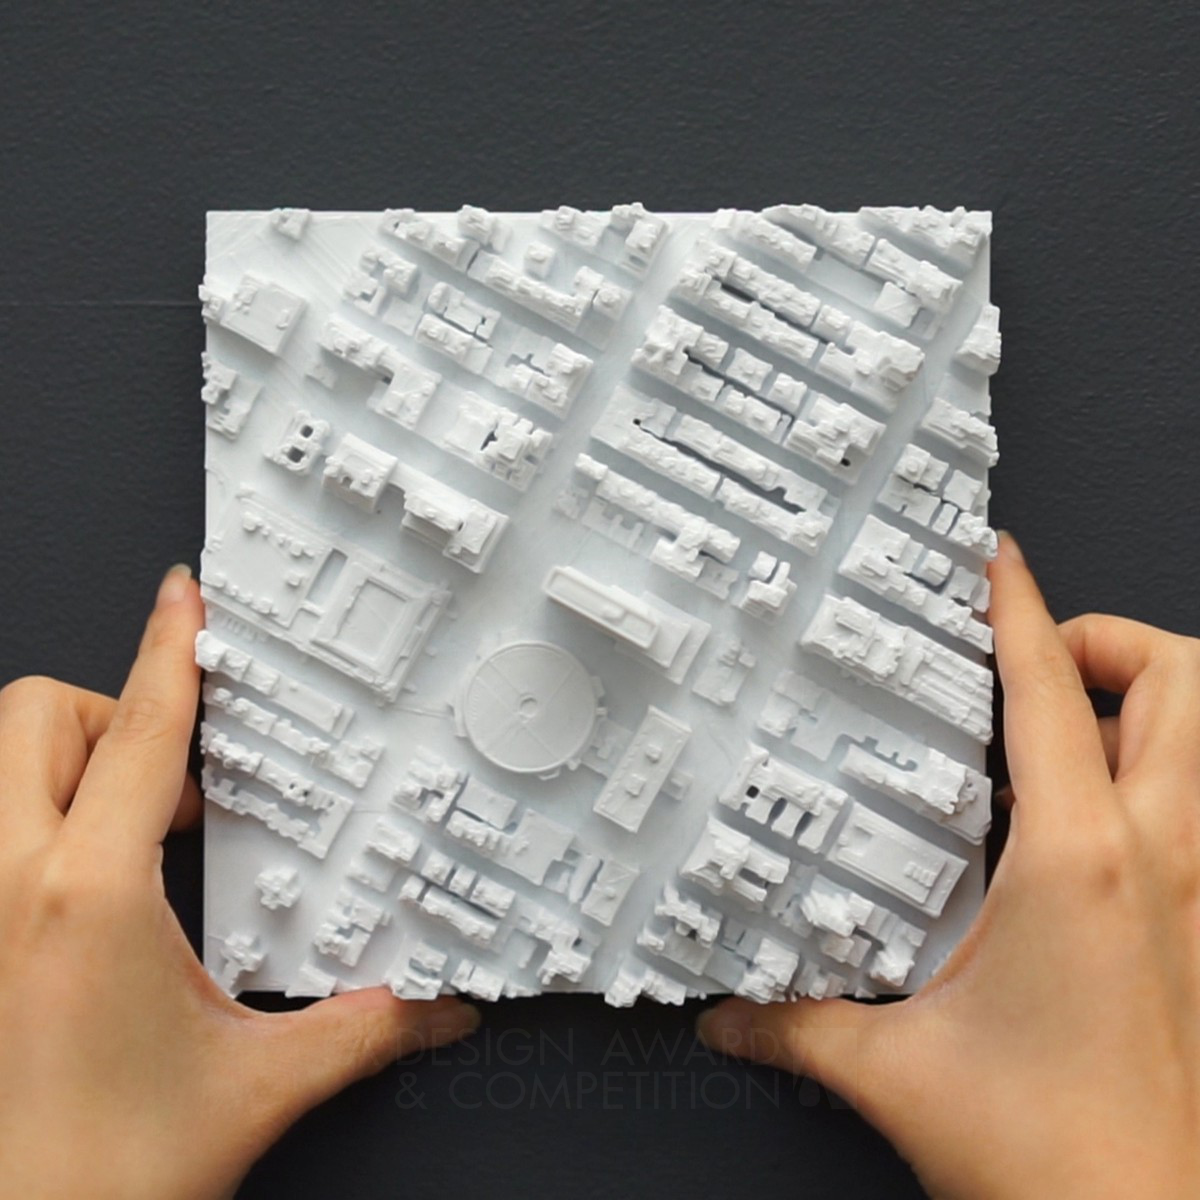 MICROSCAPE Accurate 3d printed scale city models by William Ngo and Alan Silverman